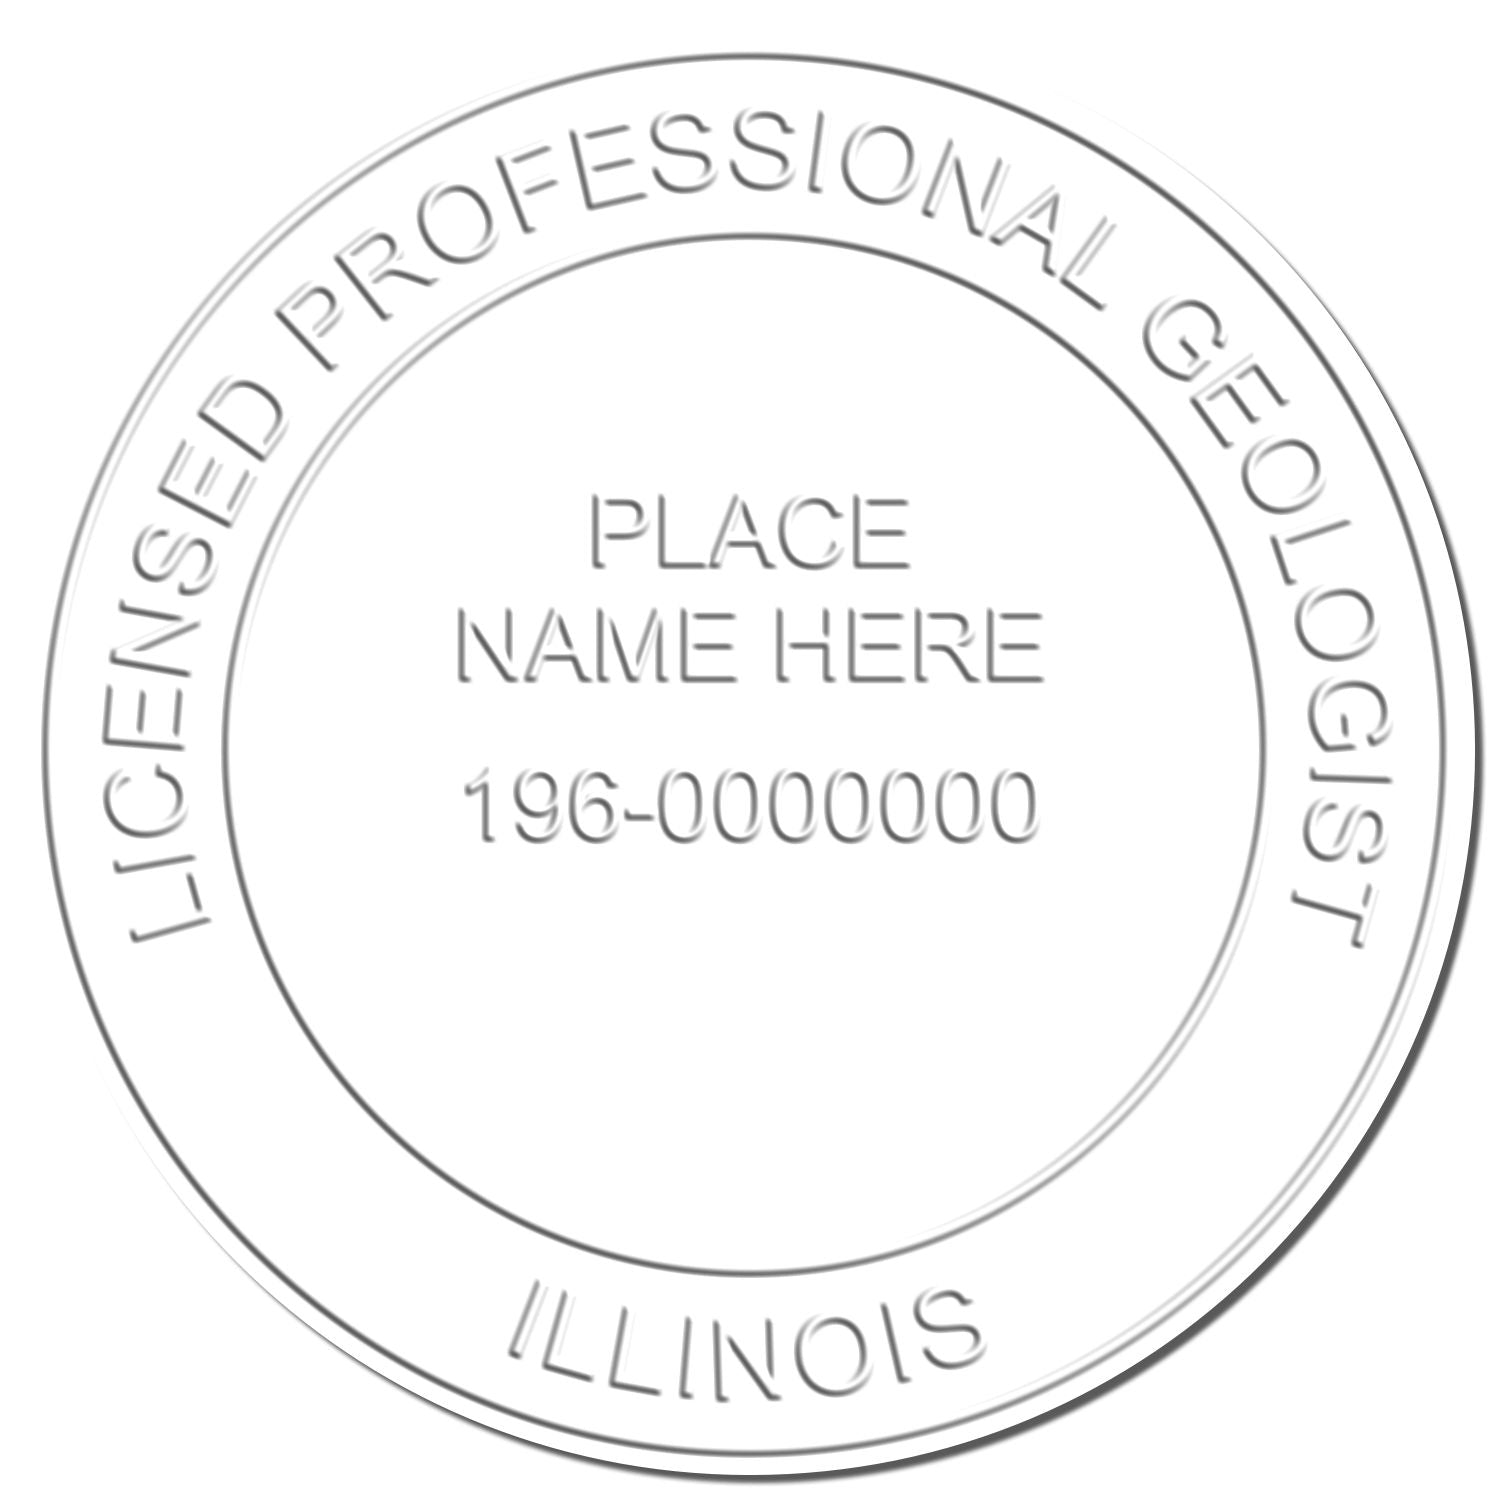 The main image for the Illinois Geologist Desk Seal depicting a sample of the imprint and imprint sample